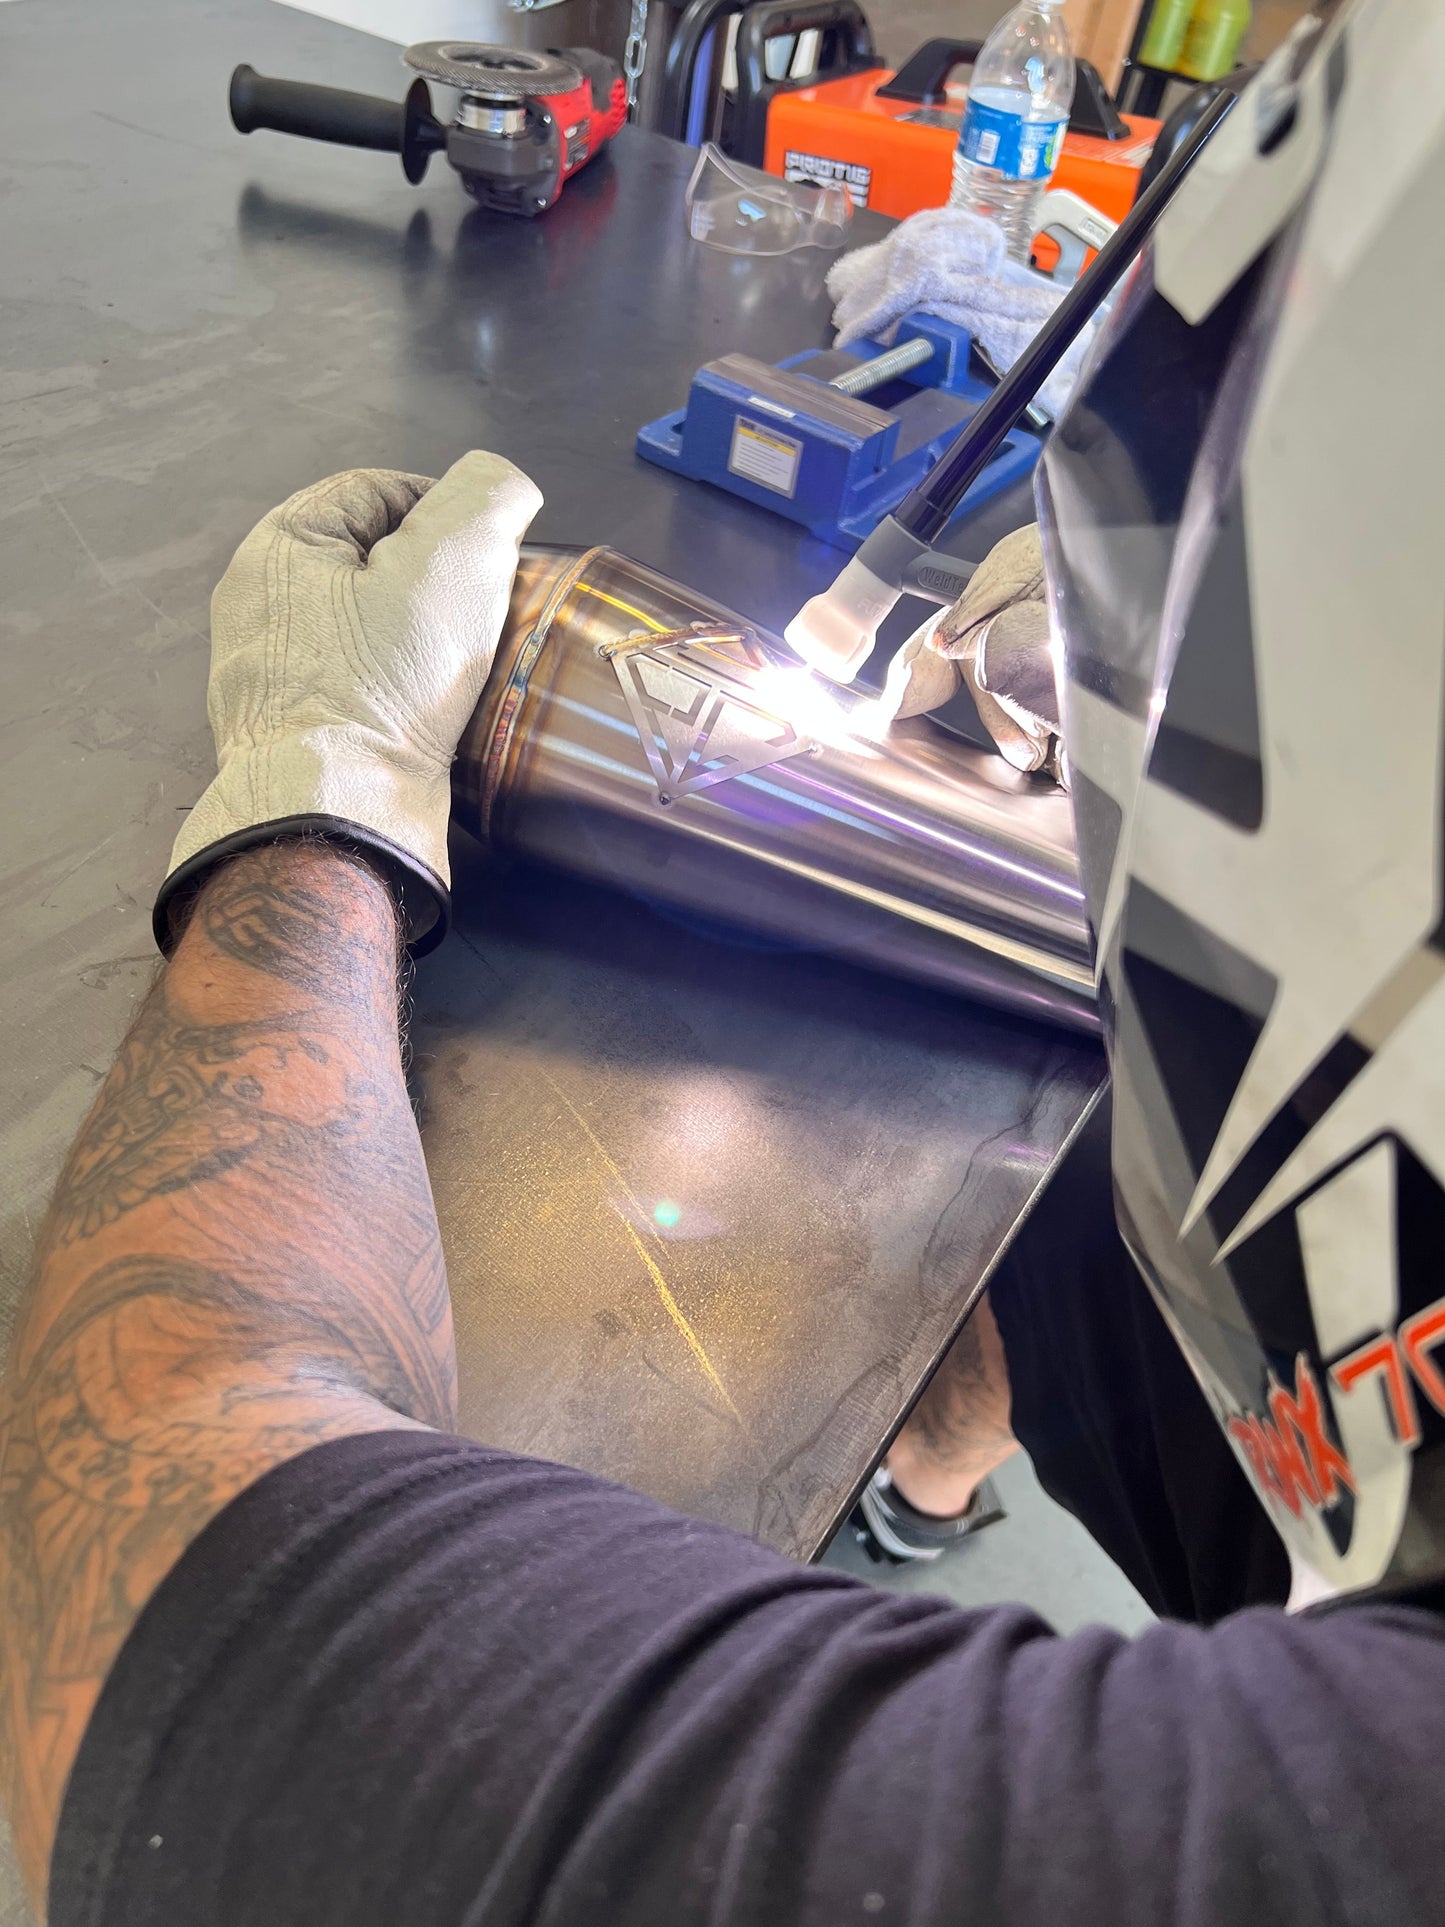 Tig welded Cutback Exhaust made for the Harley Davison Dyna